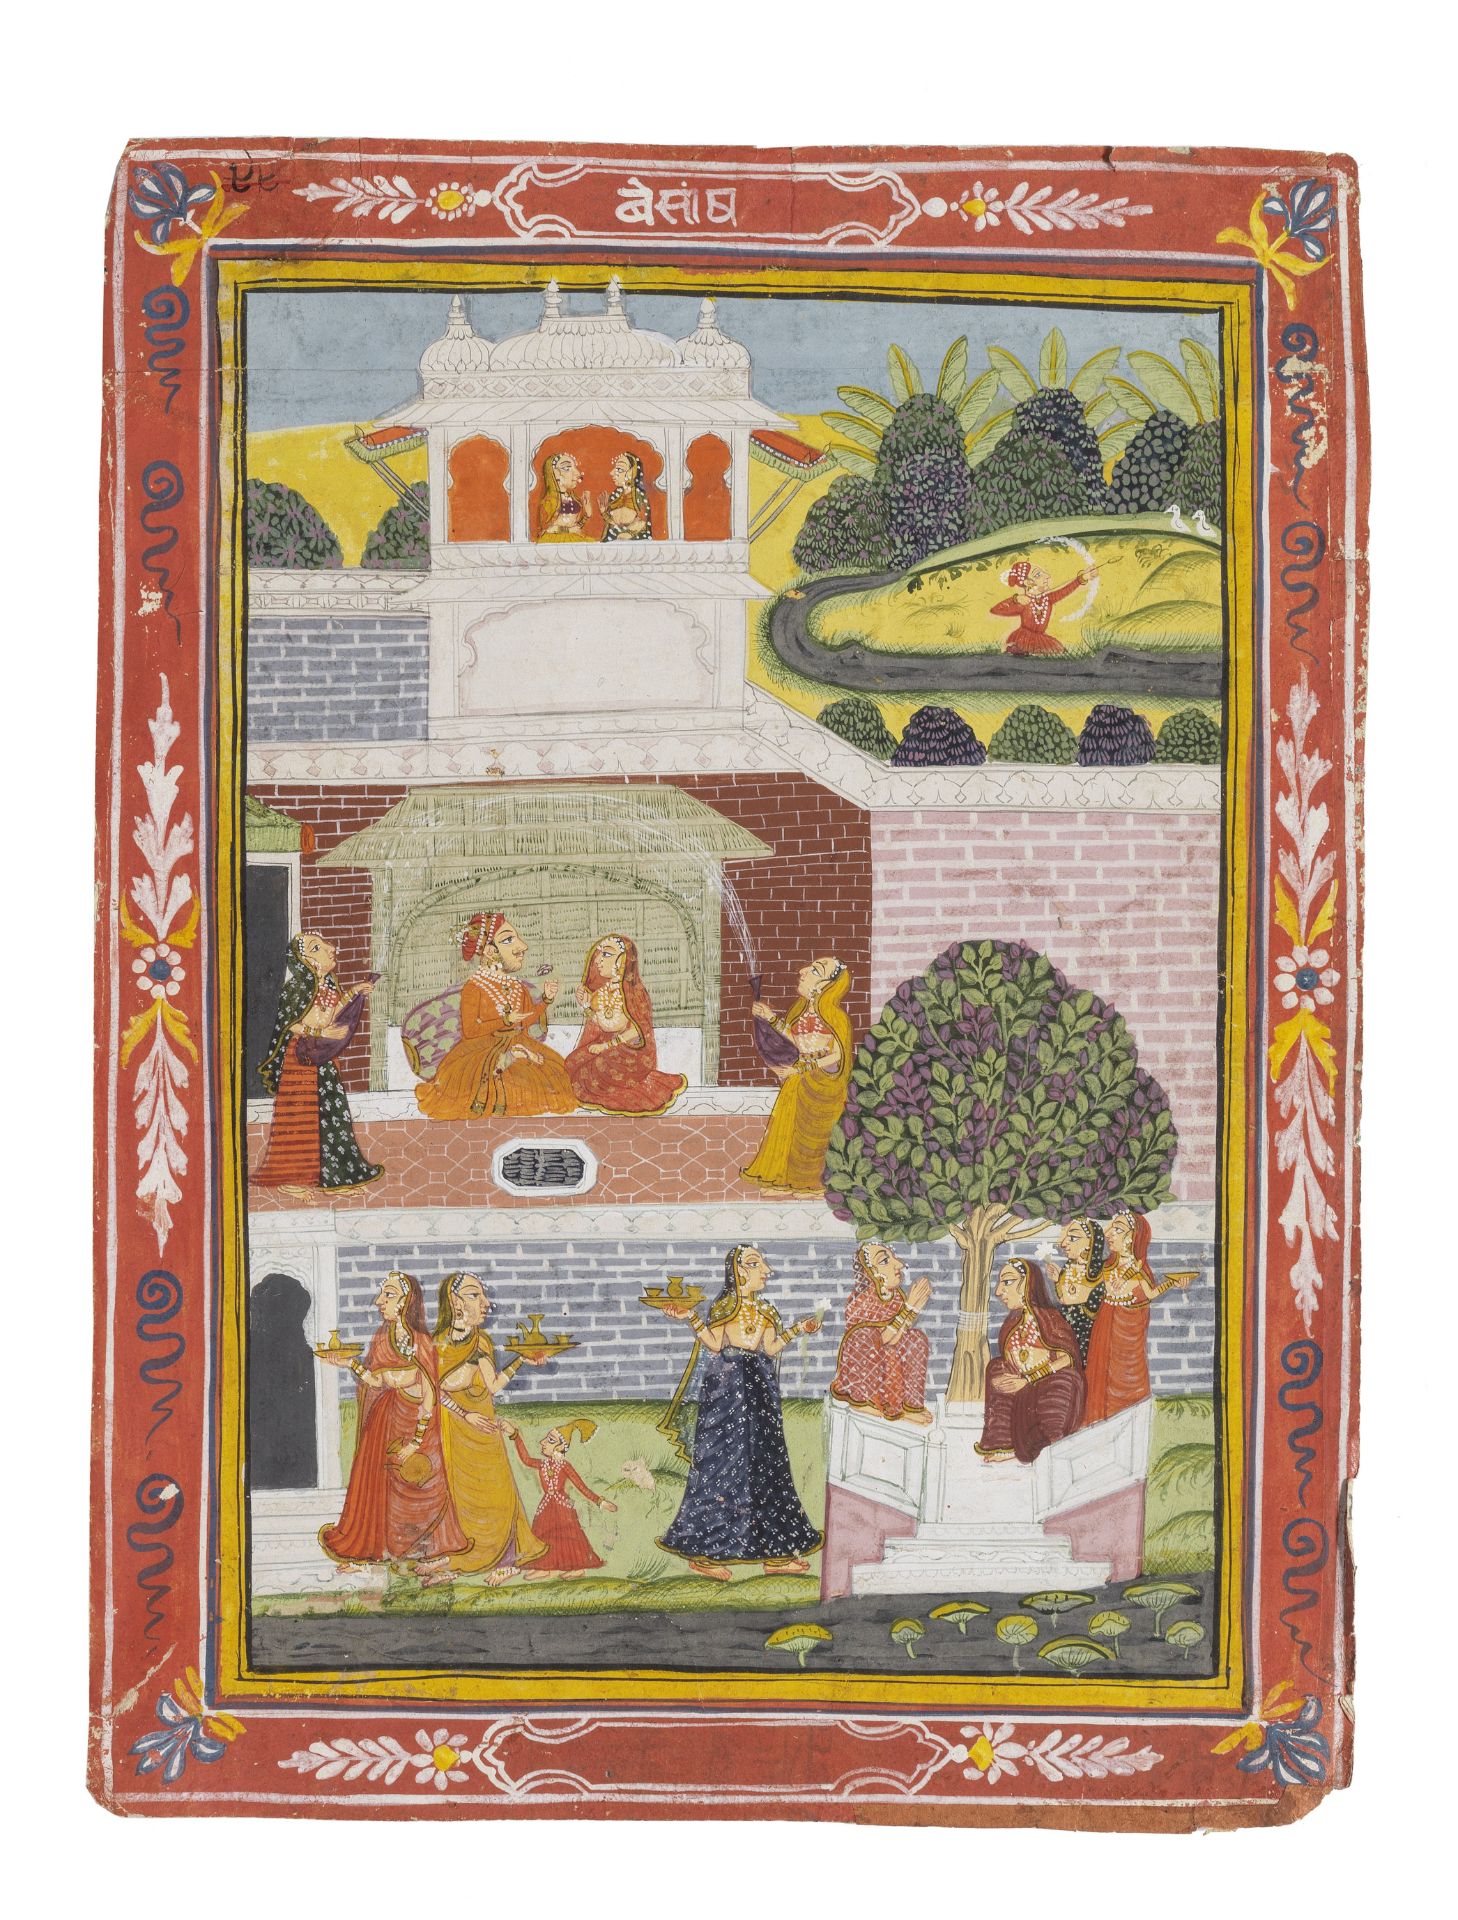 Maharana Ari Singh (reg. 1761-73) seated in a pavilion surrounded by female attendants: an illust...